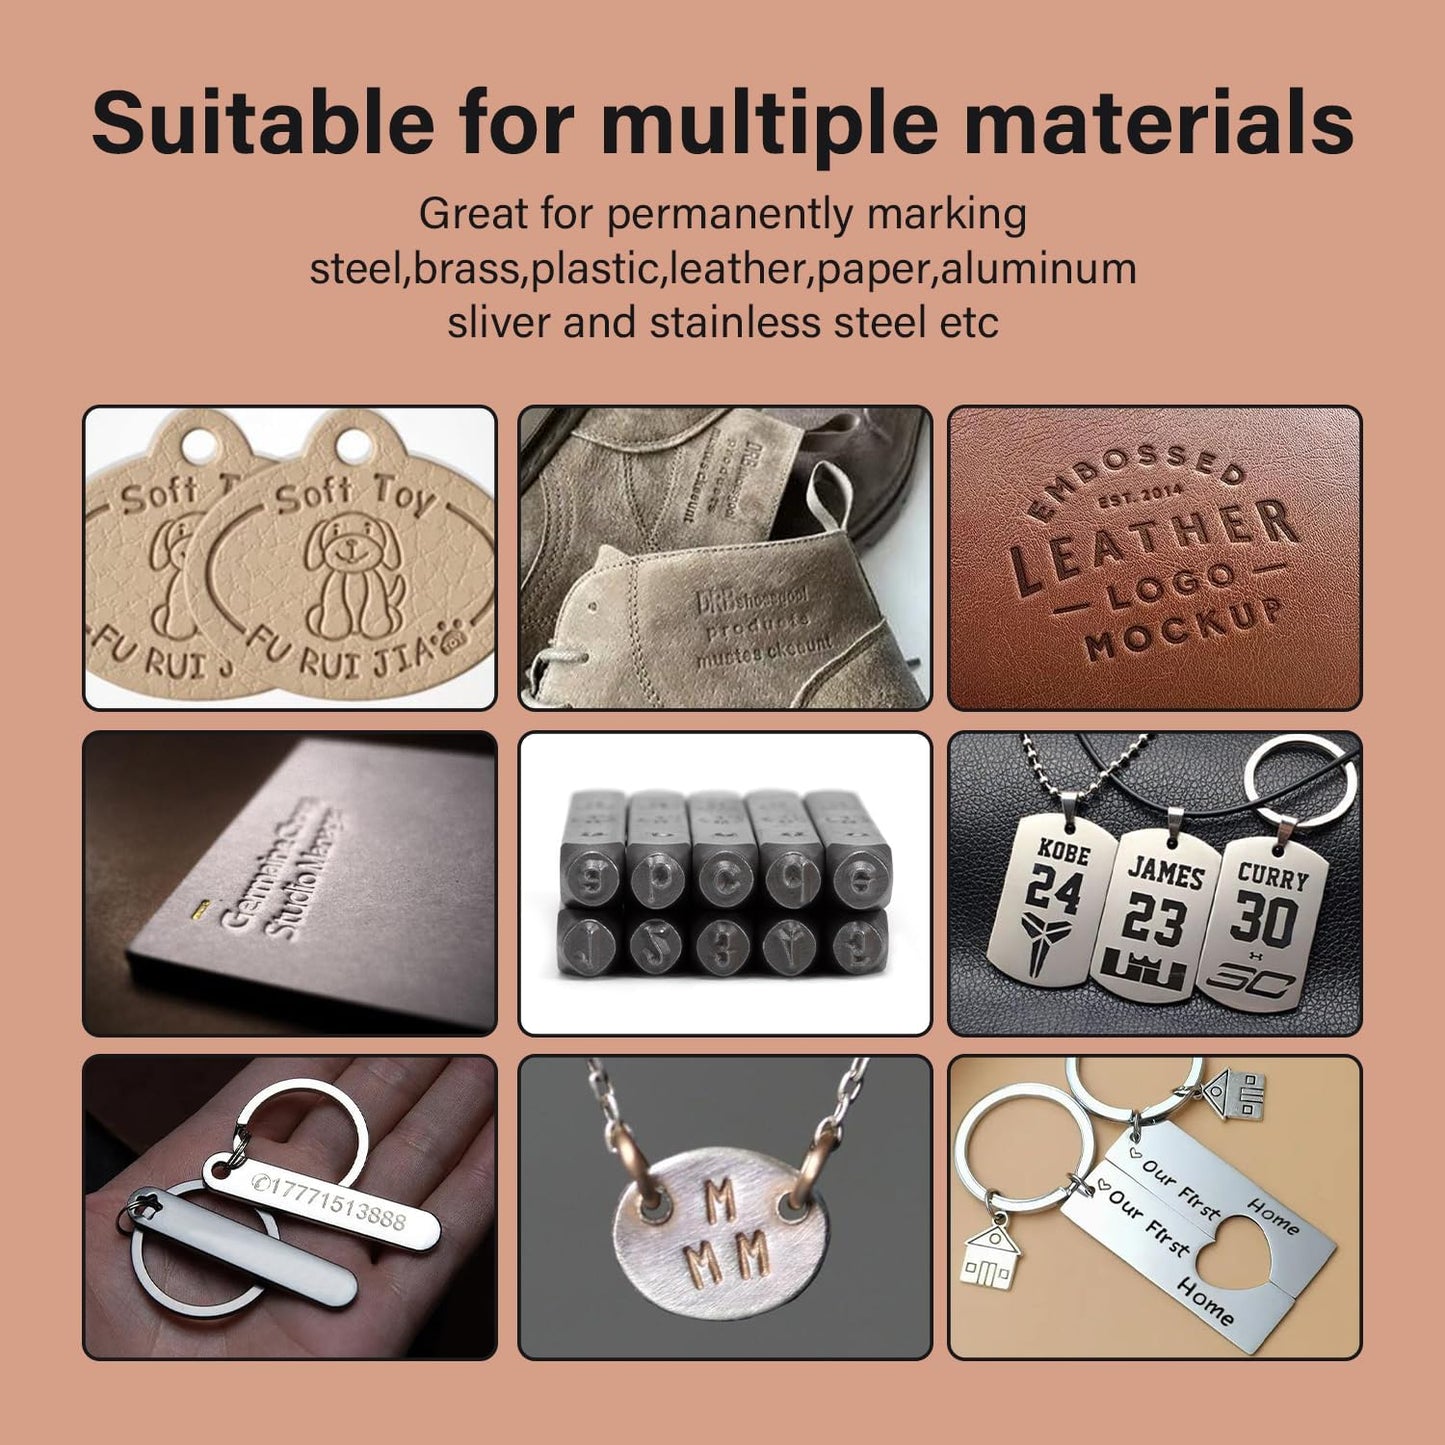 Leather Metal Stamping kit,1/8" (3mm) Stamped Steel Letter and Number Punch Jewelry Metal Stamps Set | WUTA